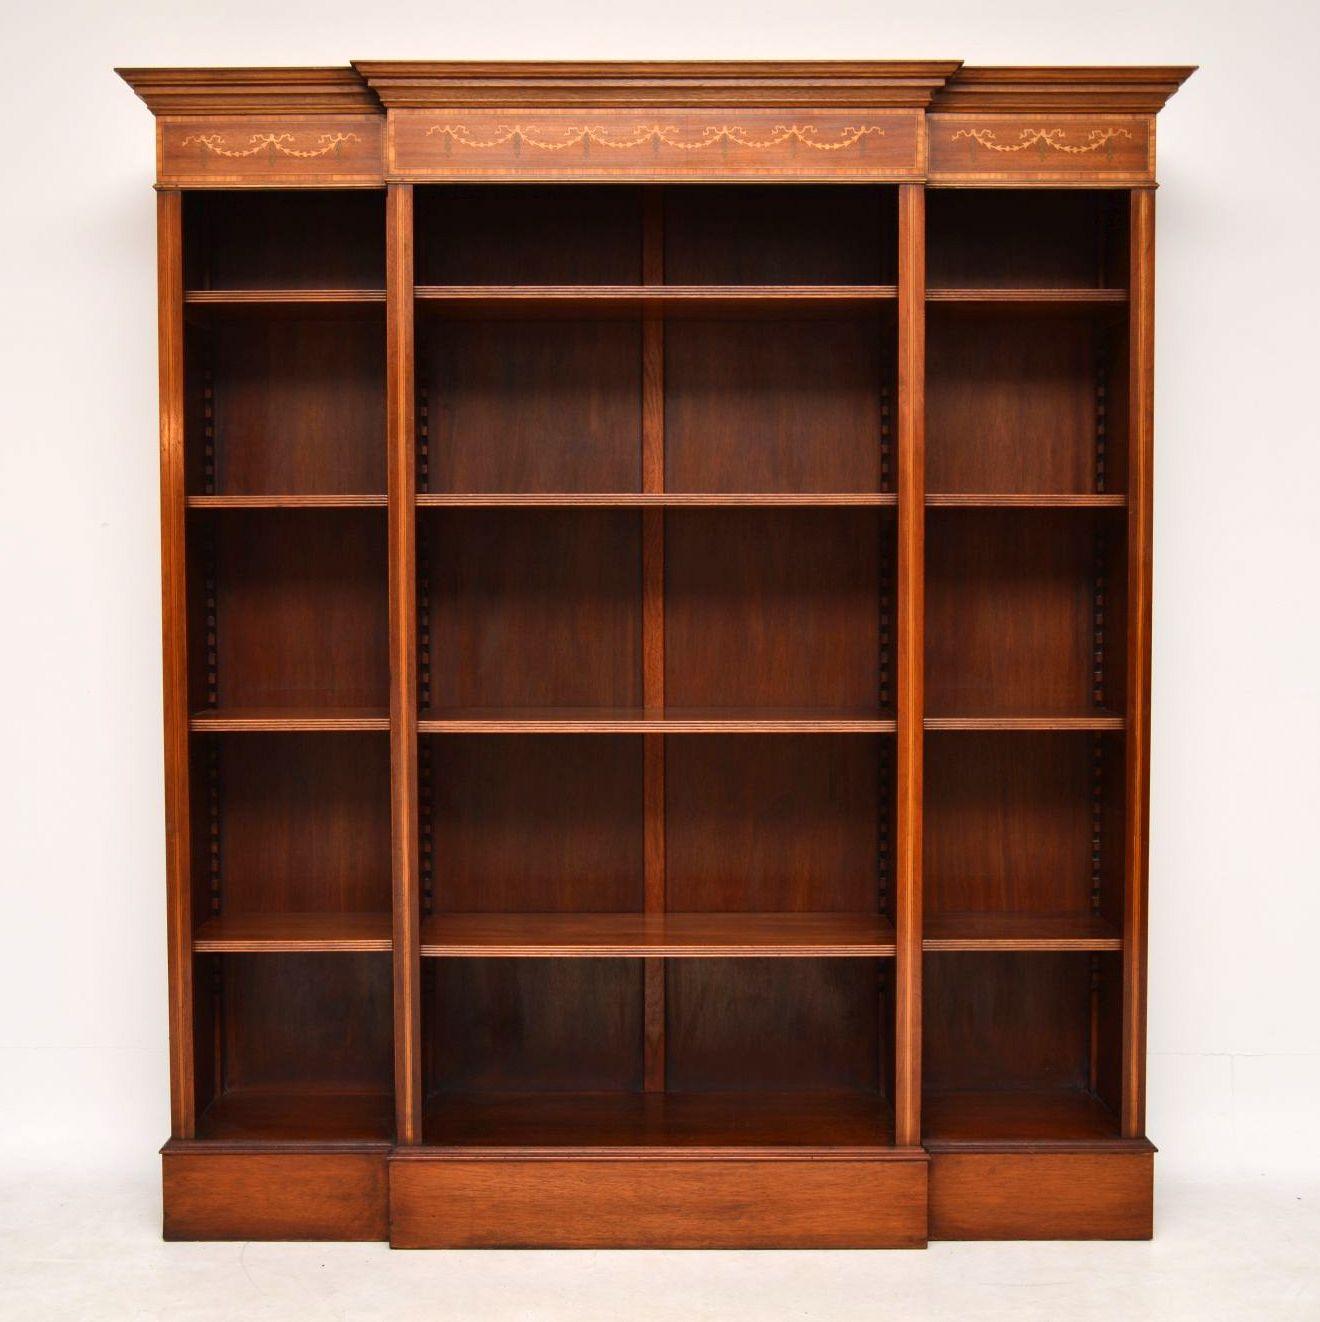 Large antique Sheraton style mahogany breakfront open bookcase, with some fine inlays of satinwood & other exotic woods. It's in excellent condition, having just been French polished & I would date it to around the 1950-1960s period. This is a well